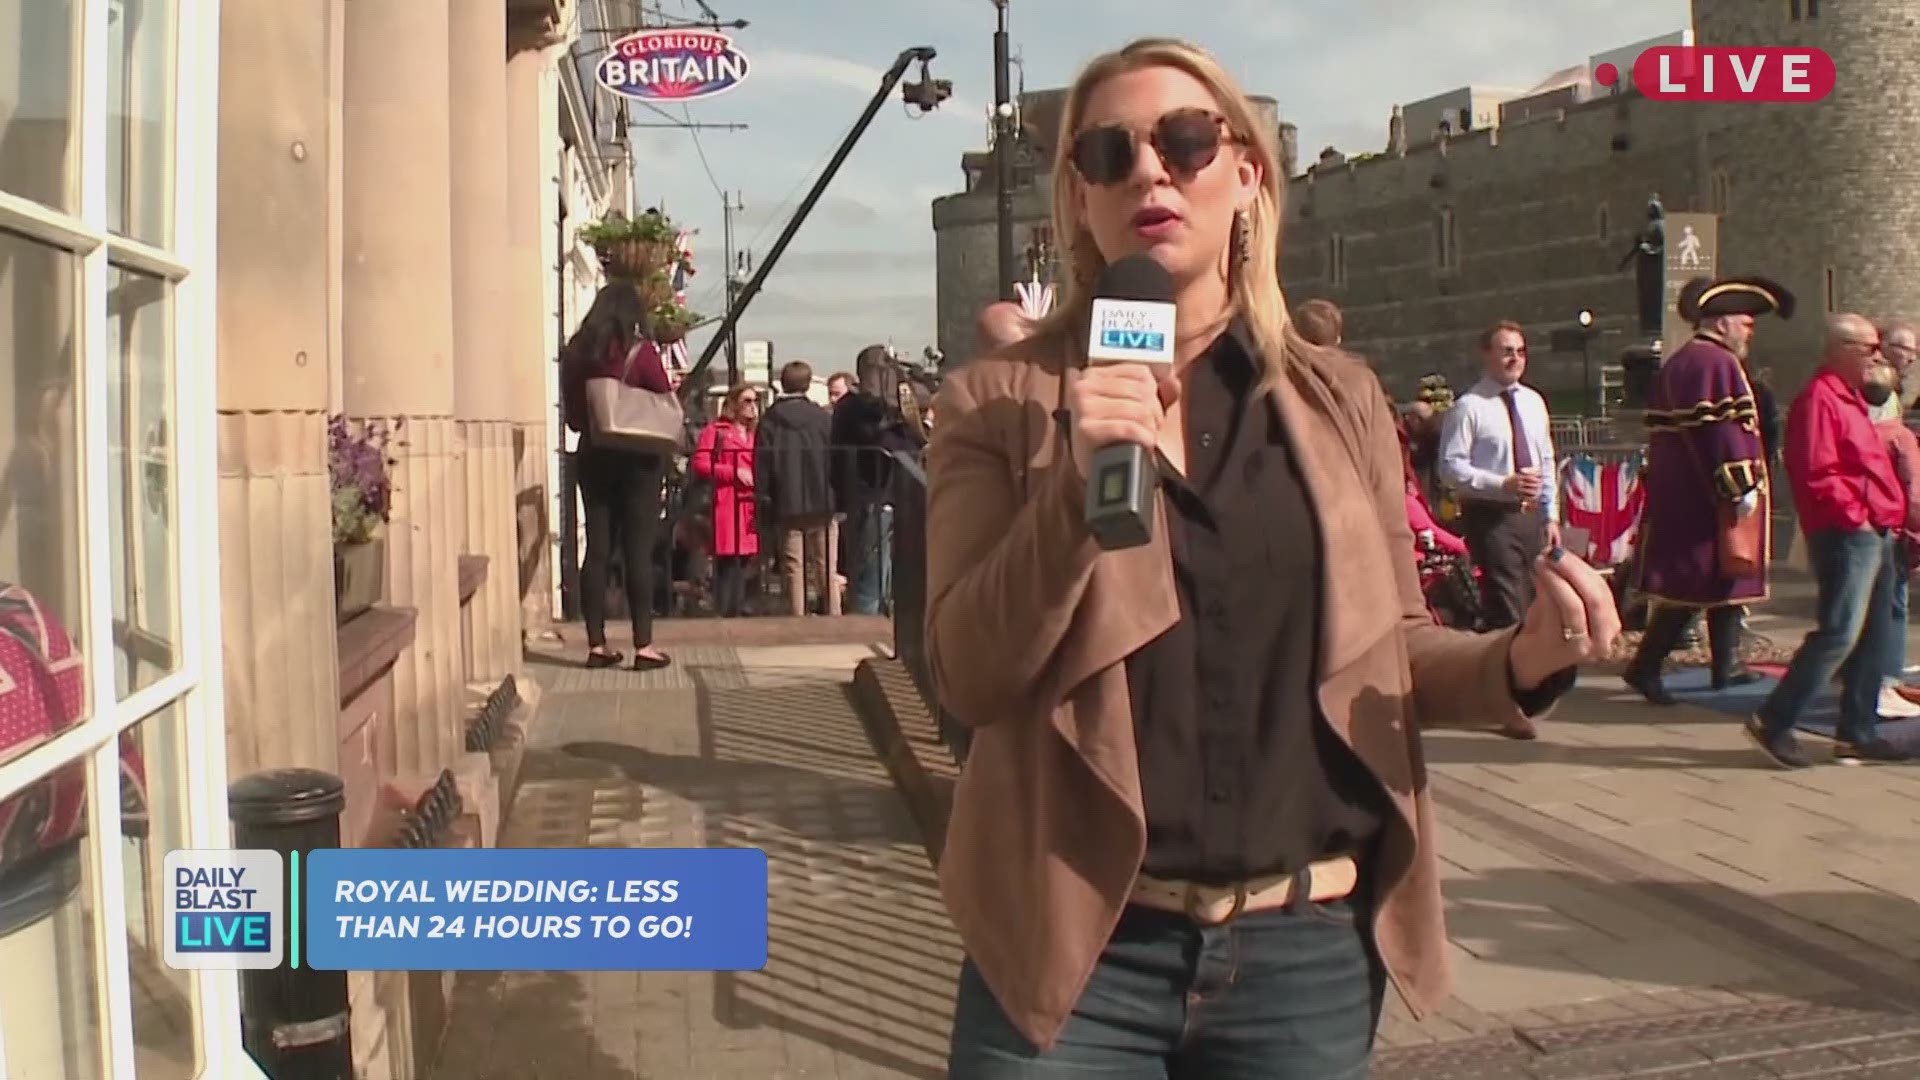 With one day until the royal wedding, Daily Blast LIVE co-host Tory Shulman went LIVE in London track all the royal fever. From all the fans camping outside Windsor Castle hoping to catch a glimpse of the royals to the Brits reactions to Meghan Markle may